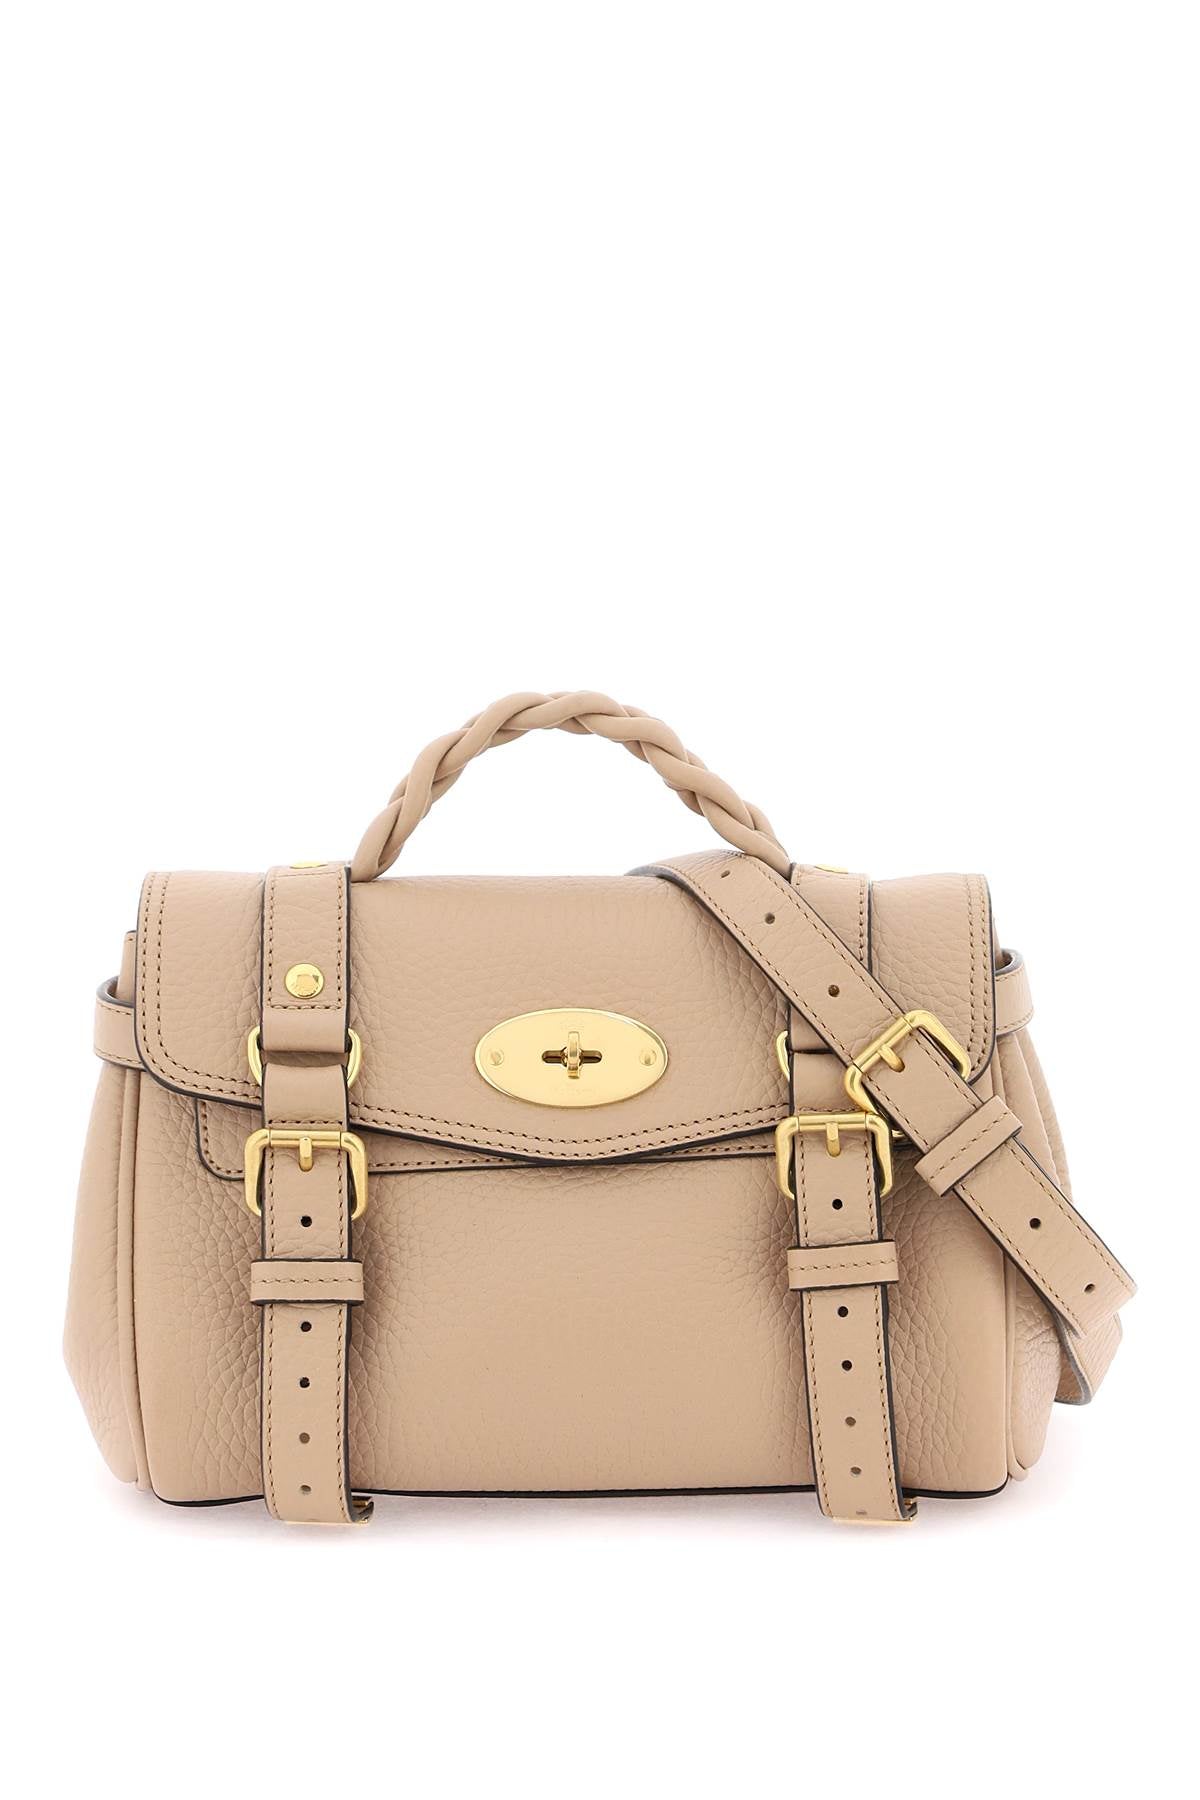 MULBERRY Chic Mini Tan Leather Handbag with Braided Handle and Gold-Tone Accents